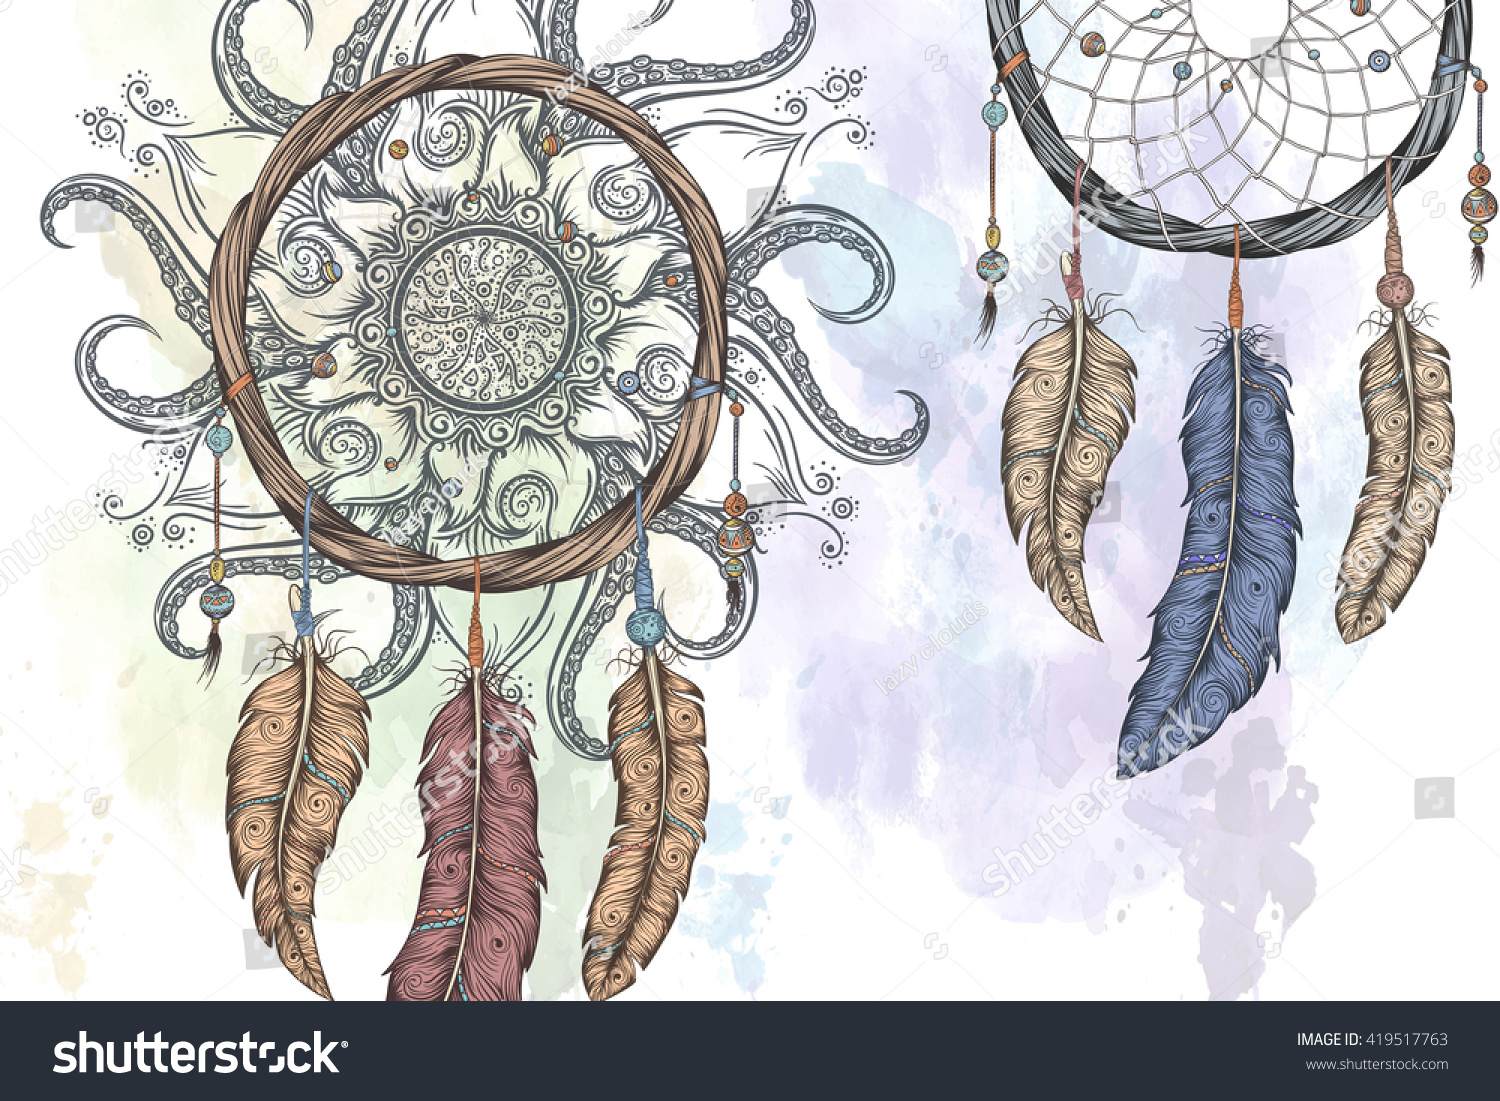 SVG of Dream catcher hand drawn vector illustration with abstract mandala. svg